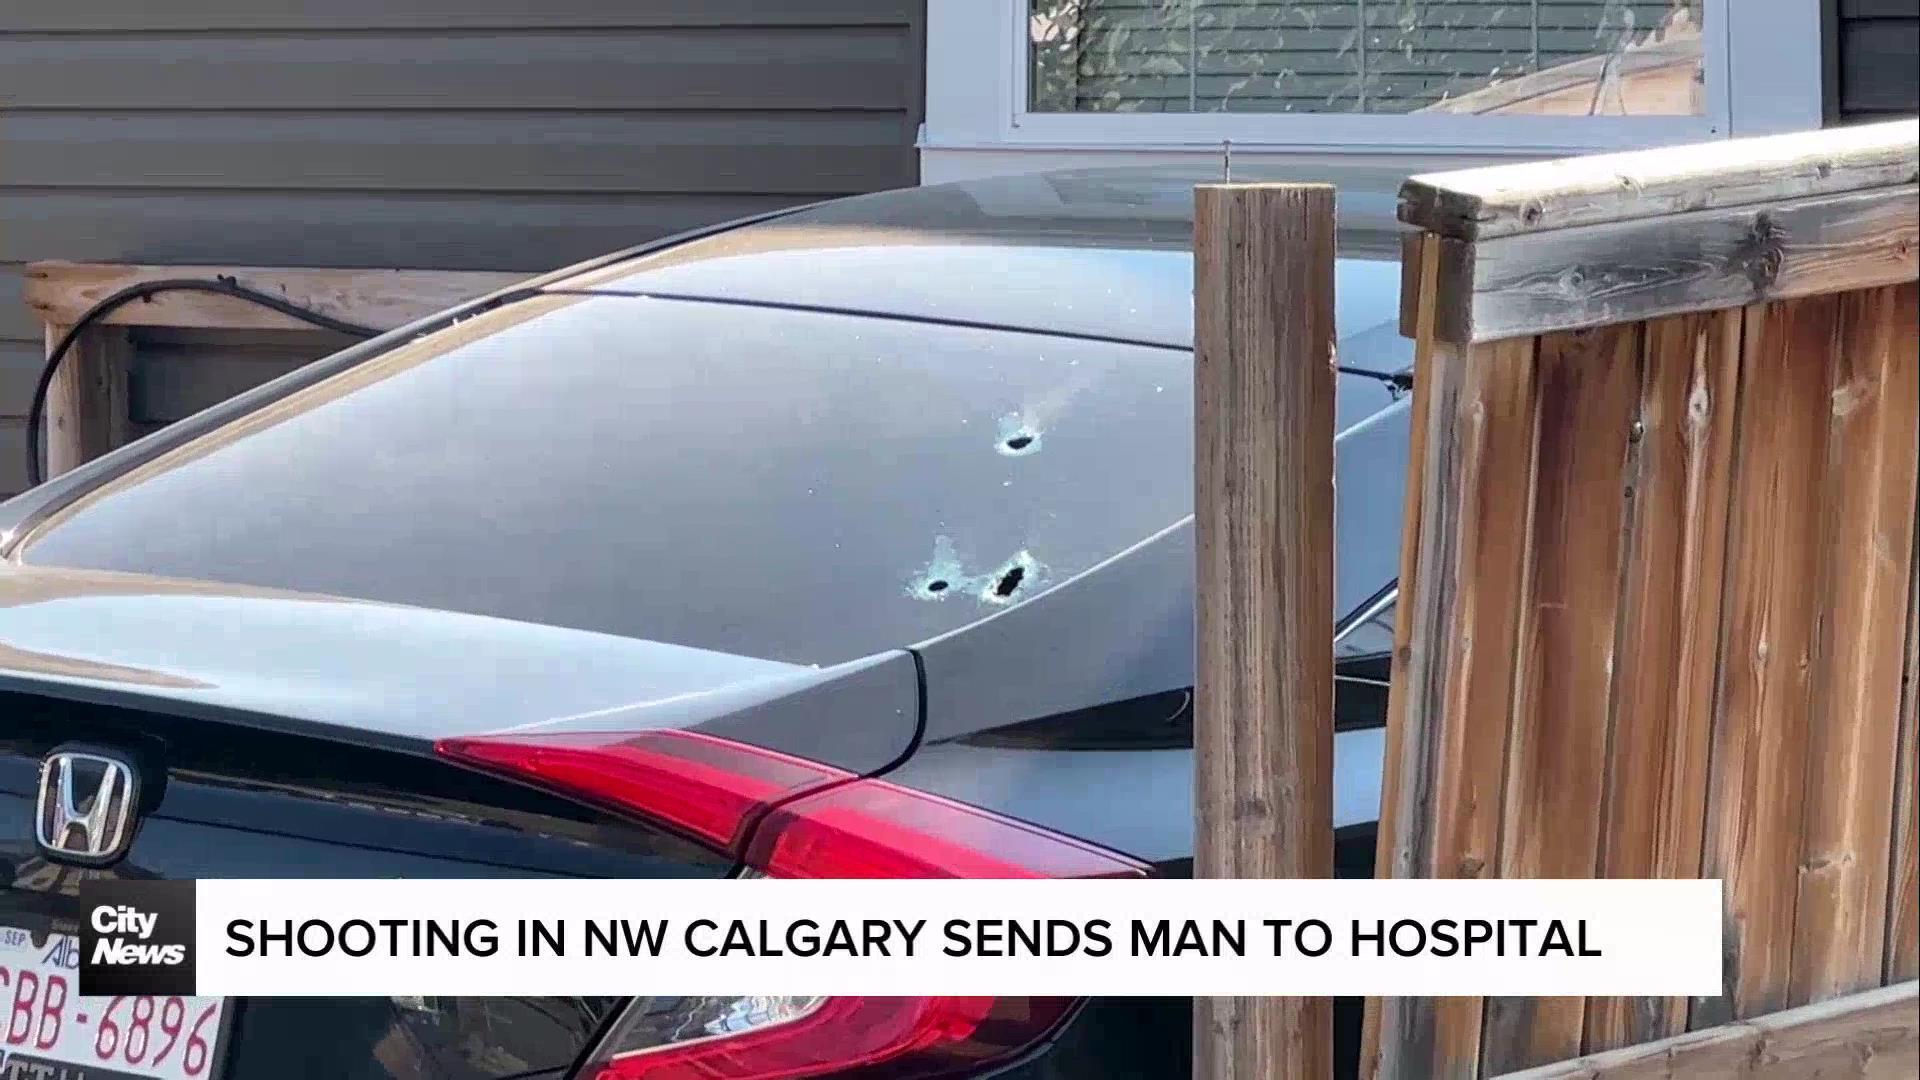 Shooting in NW Calgary sends man to hospital